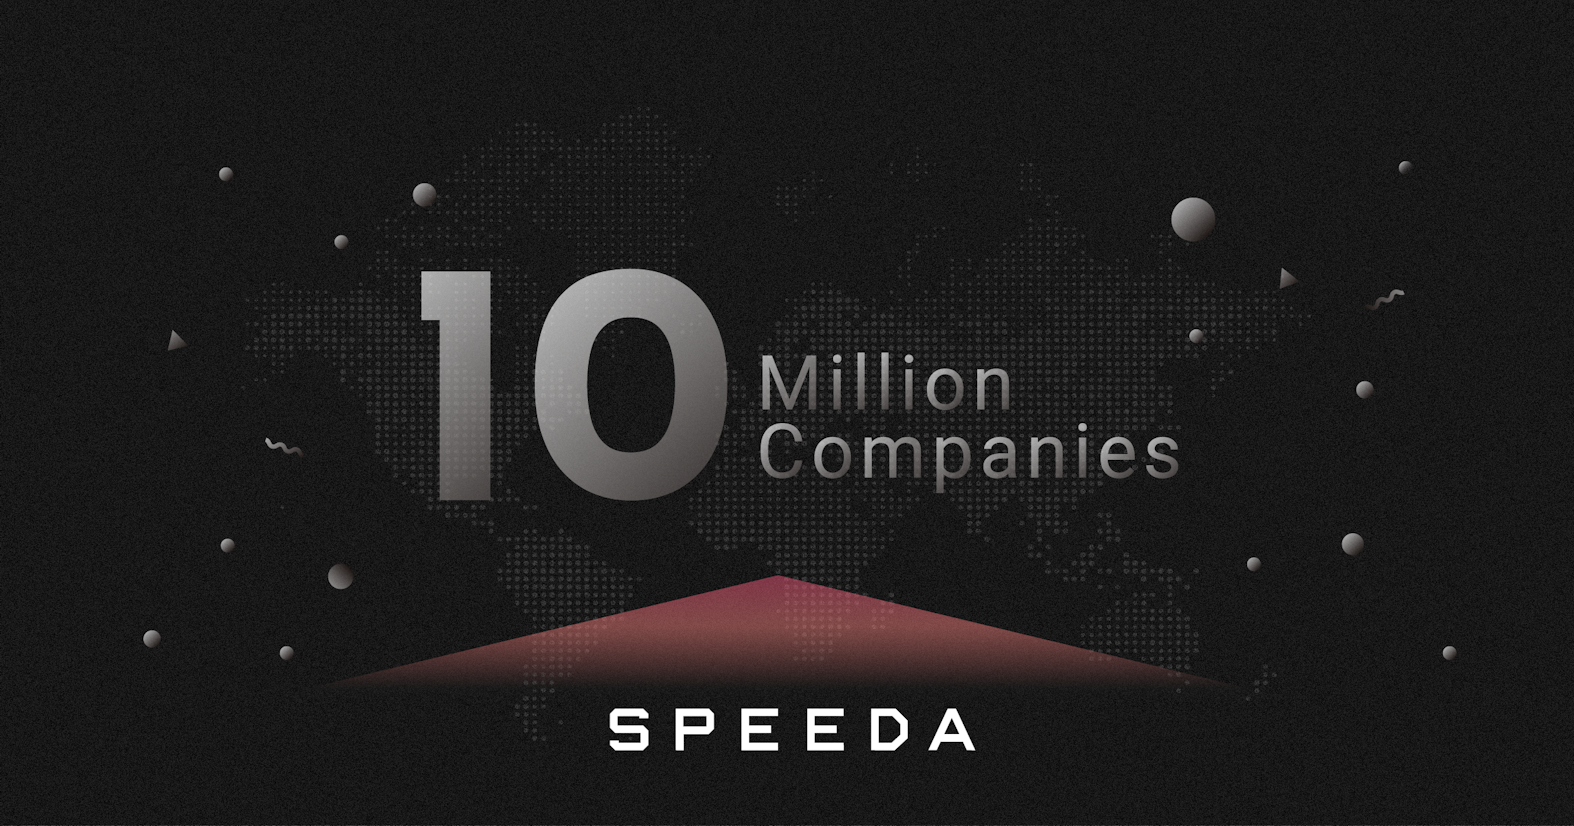 SPEEDA Expands Coverage to Over 10 Million Companies Worldwide